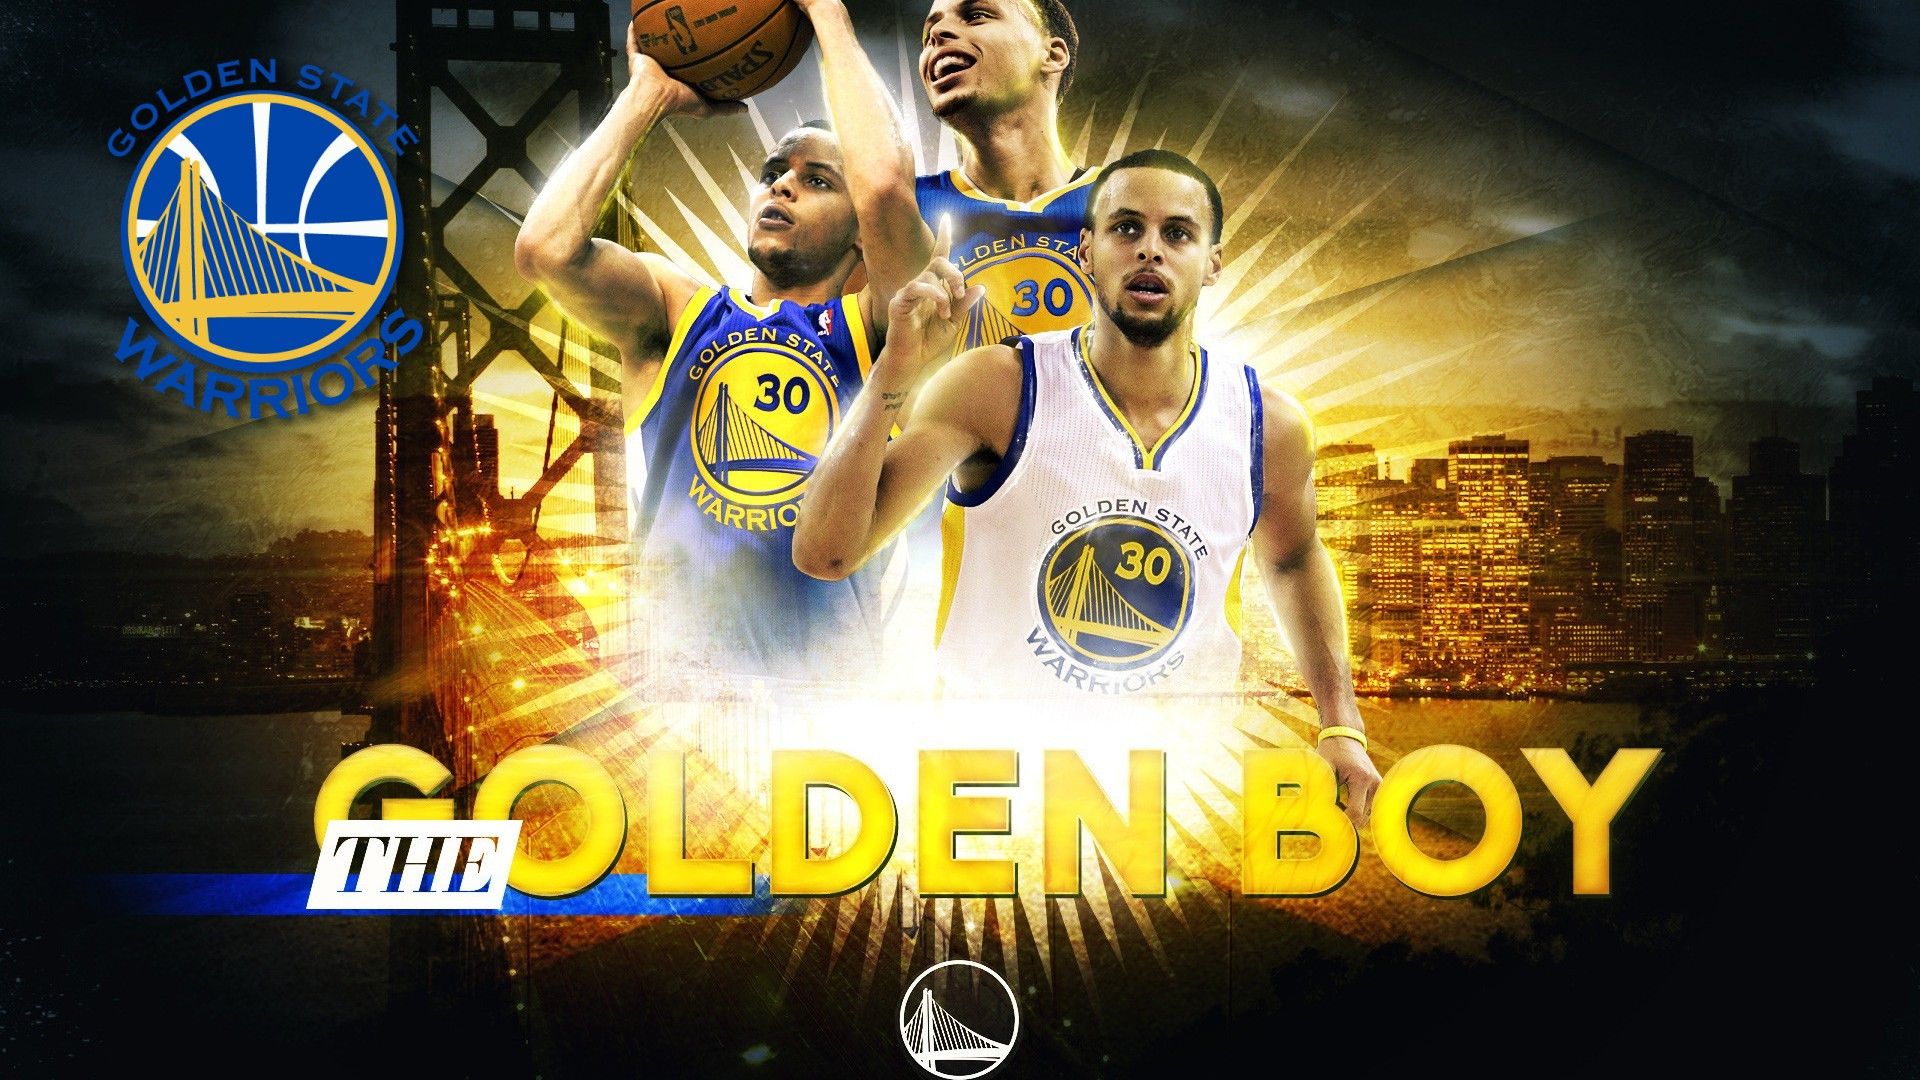 Image may contain 3 people  Nba stephen curry Stephen curry basketball Curry  nba